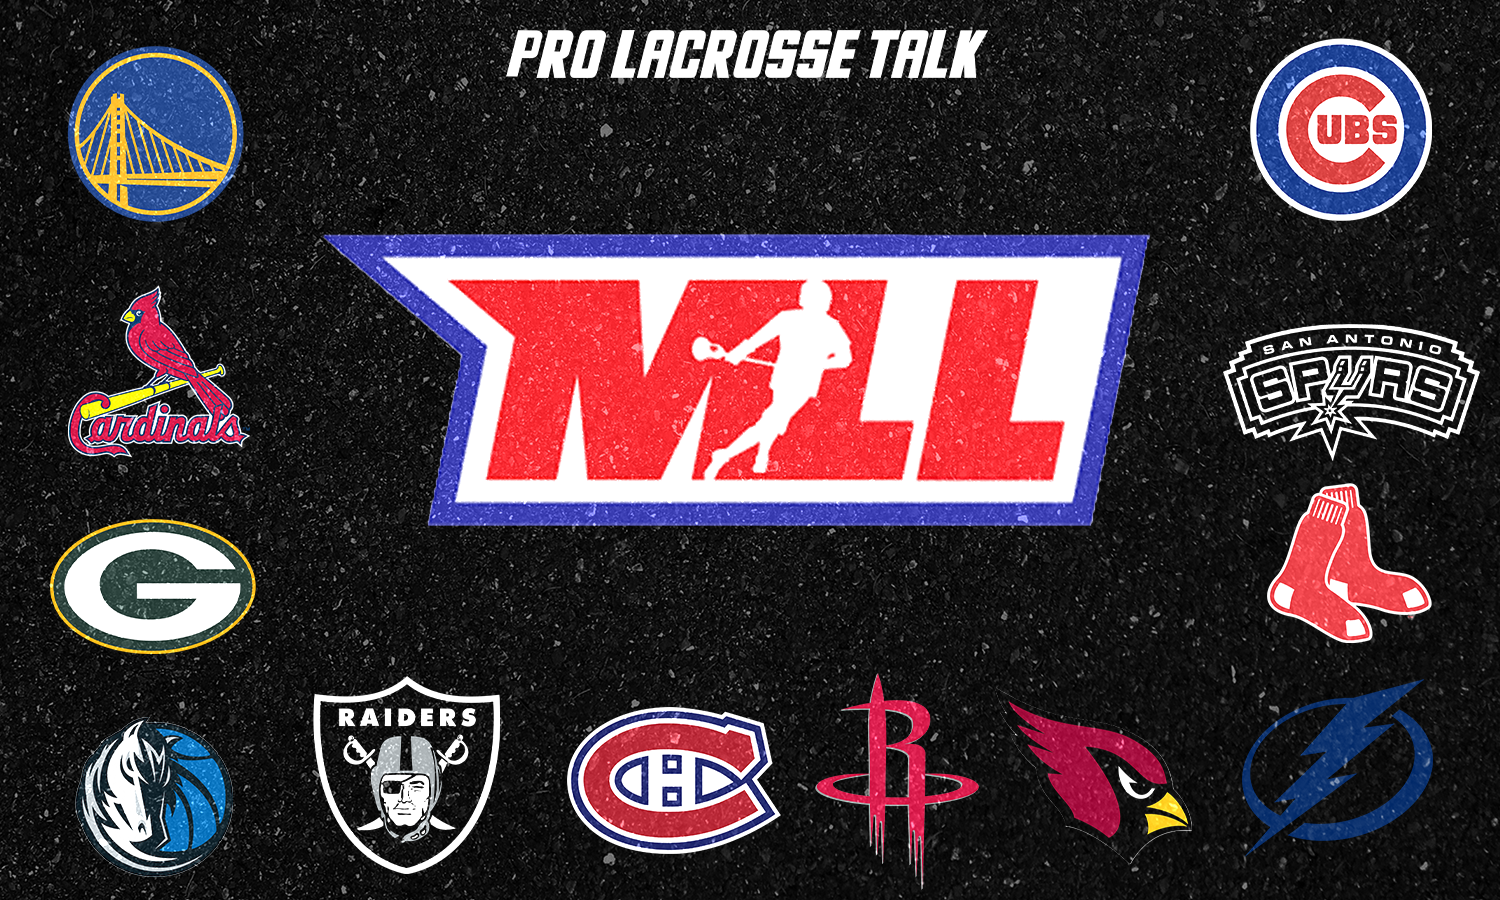 A guide to choosing your MLL team based on your major sports